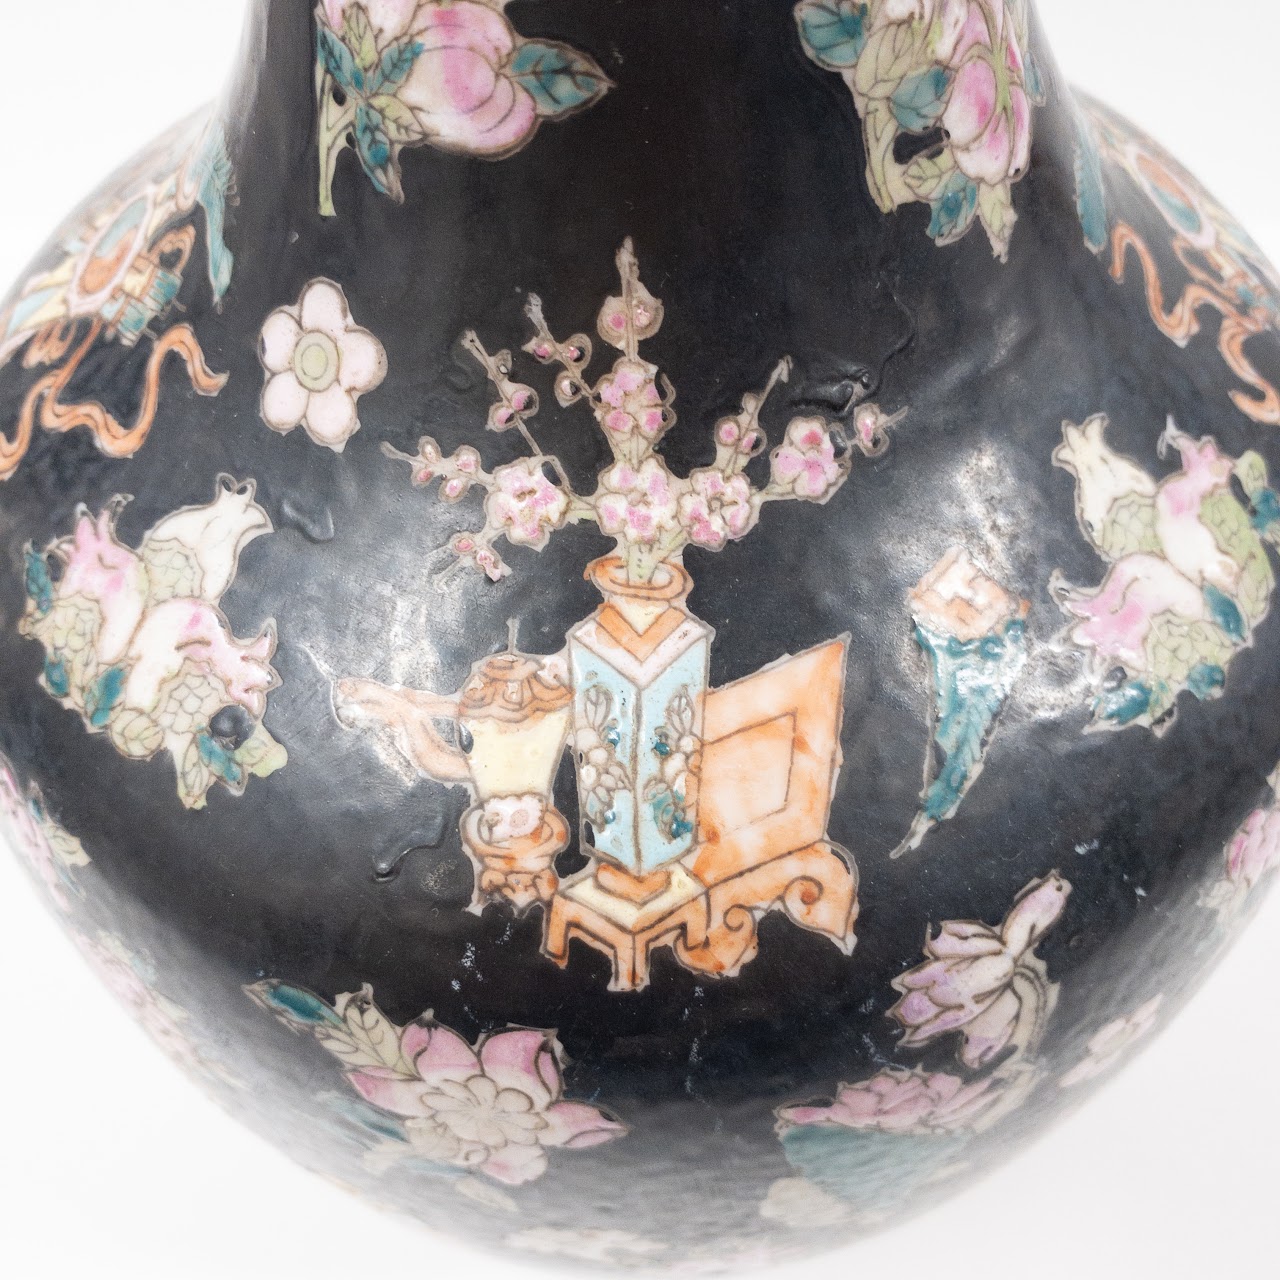 Chinese Black and Floral Ceramic Vase